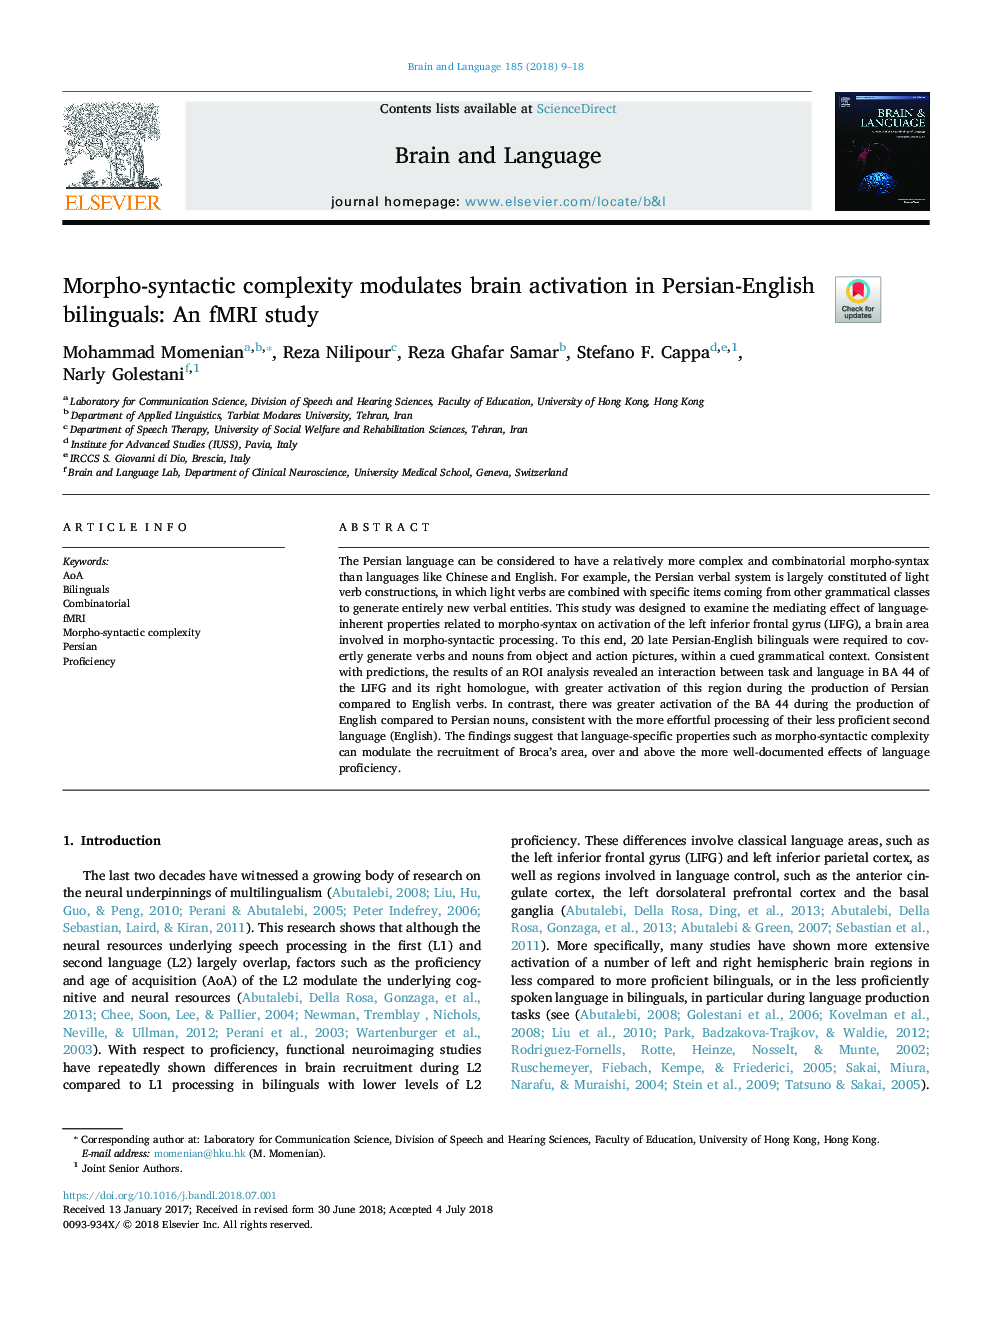 Morpho-syntactic complexity modulates brain activation in Persian-English bilinguals: An fMRI study